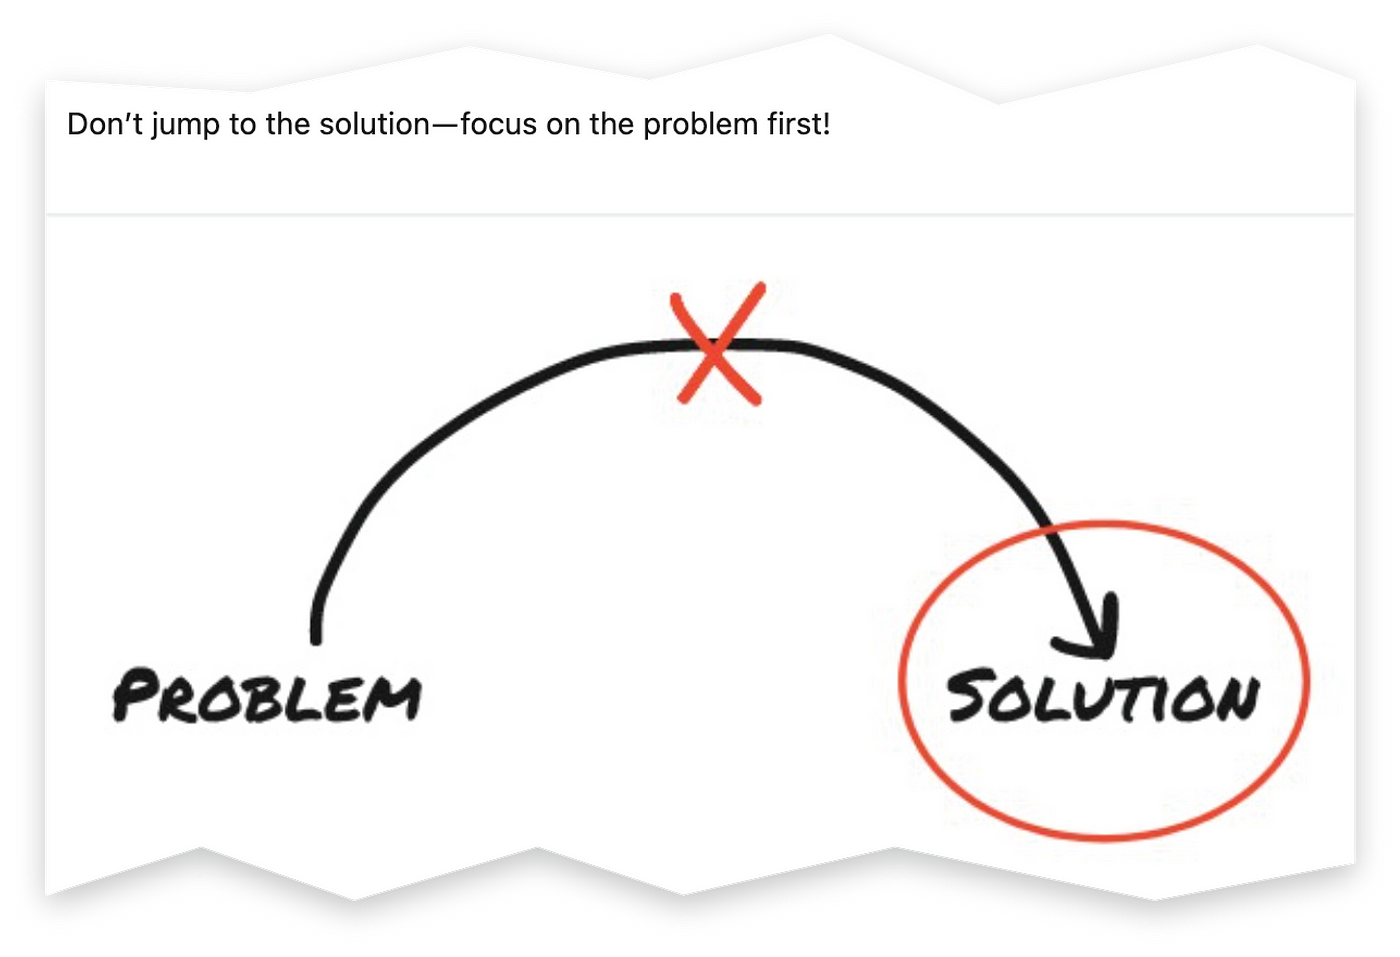 Snippet of a social media post that says “Don’t jump to the solution-focus on the problem first!”. Includes a diagram with a crossed-out arrow going from the word “problem” to the word “solution.”